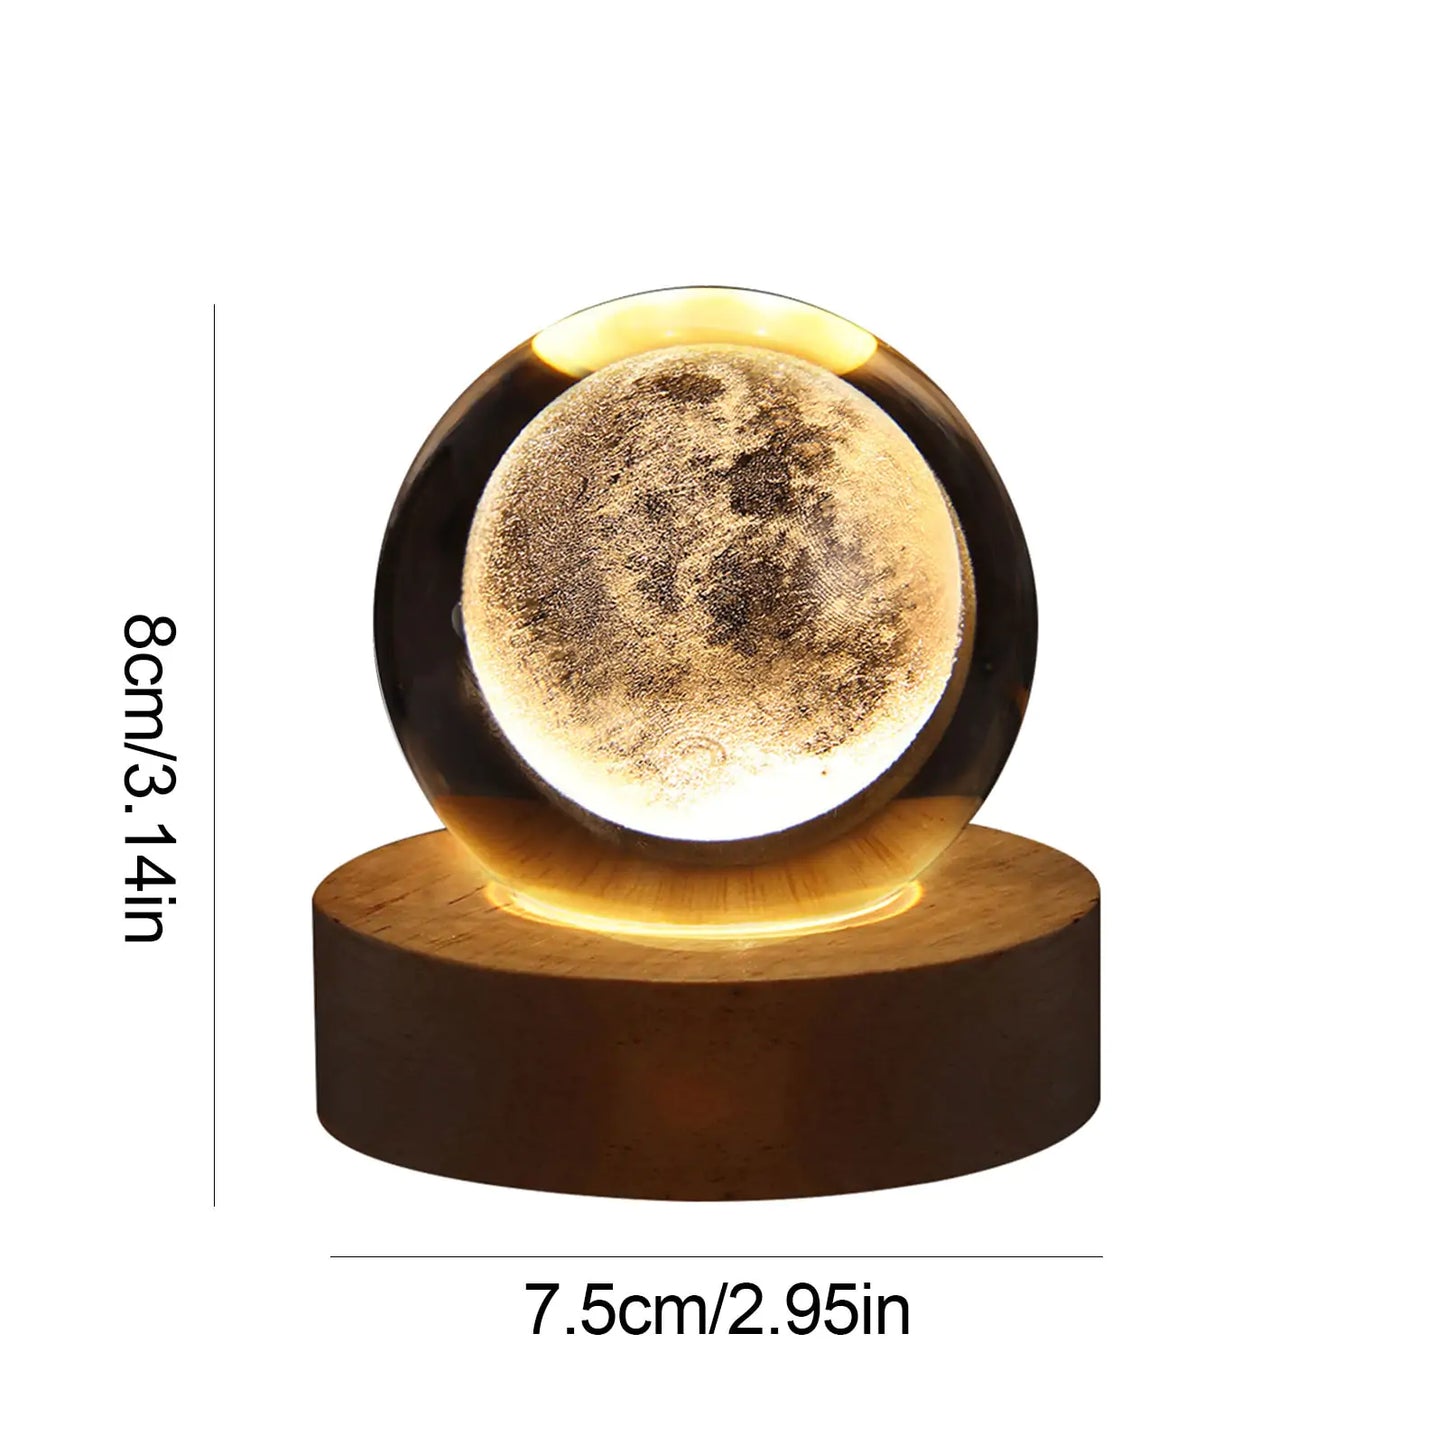 the moon lamp is on a wooden stand